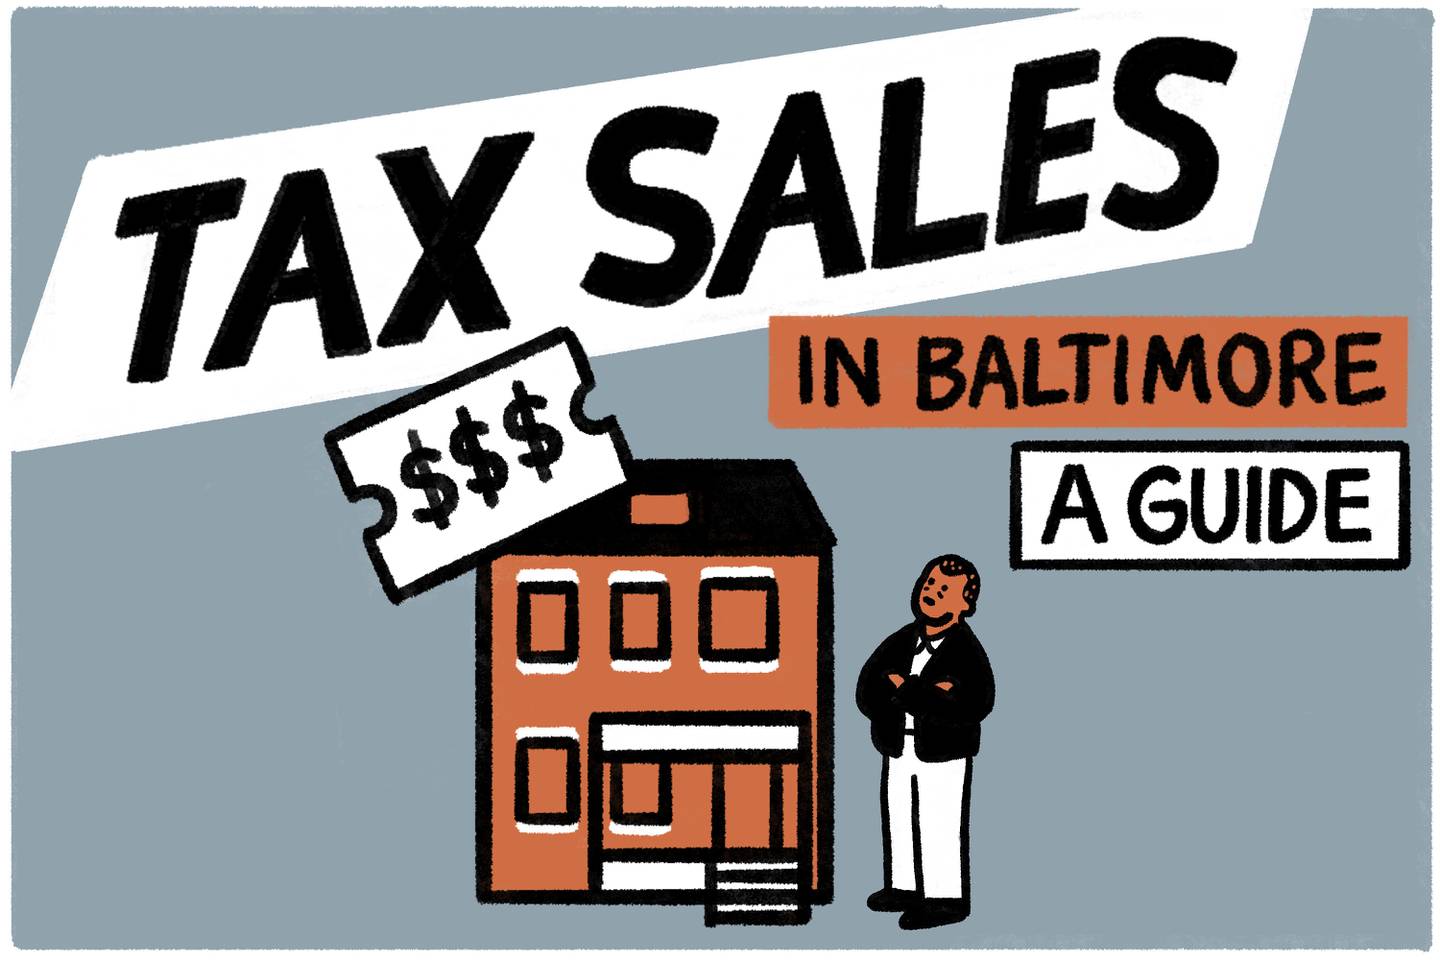 Hand lettering that says "Tax sales in Baltimore: a guide" floats over row home and man.